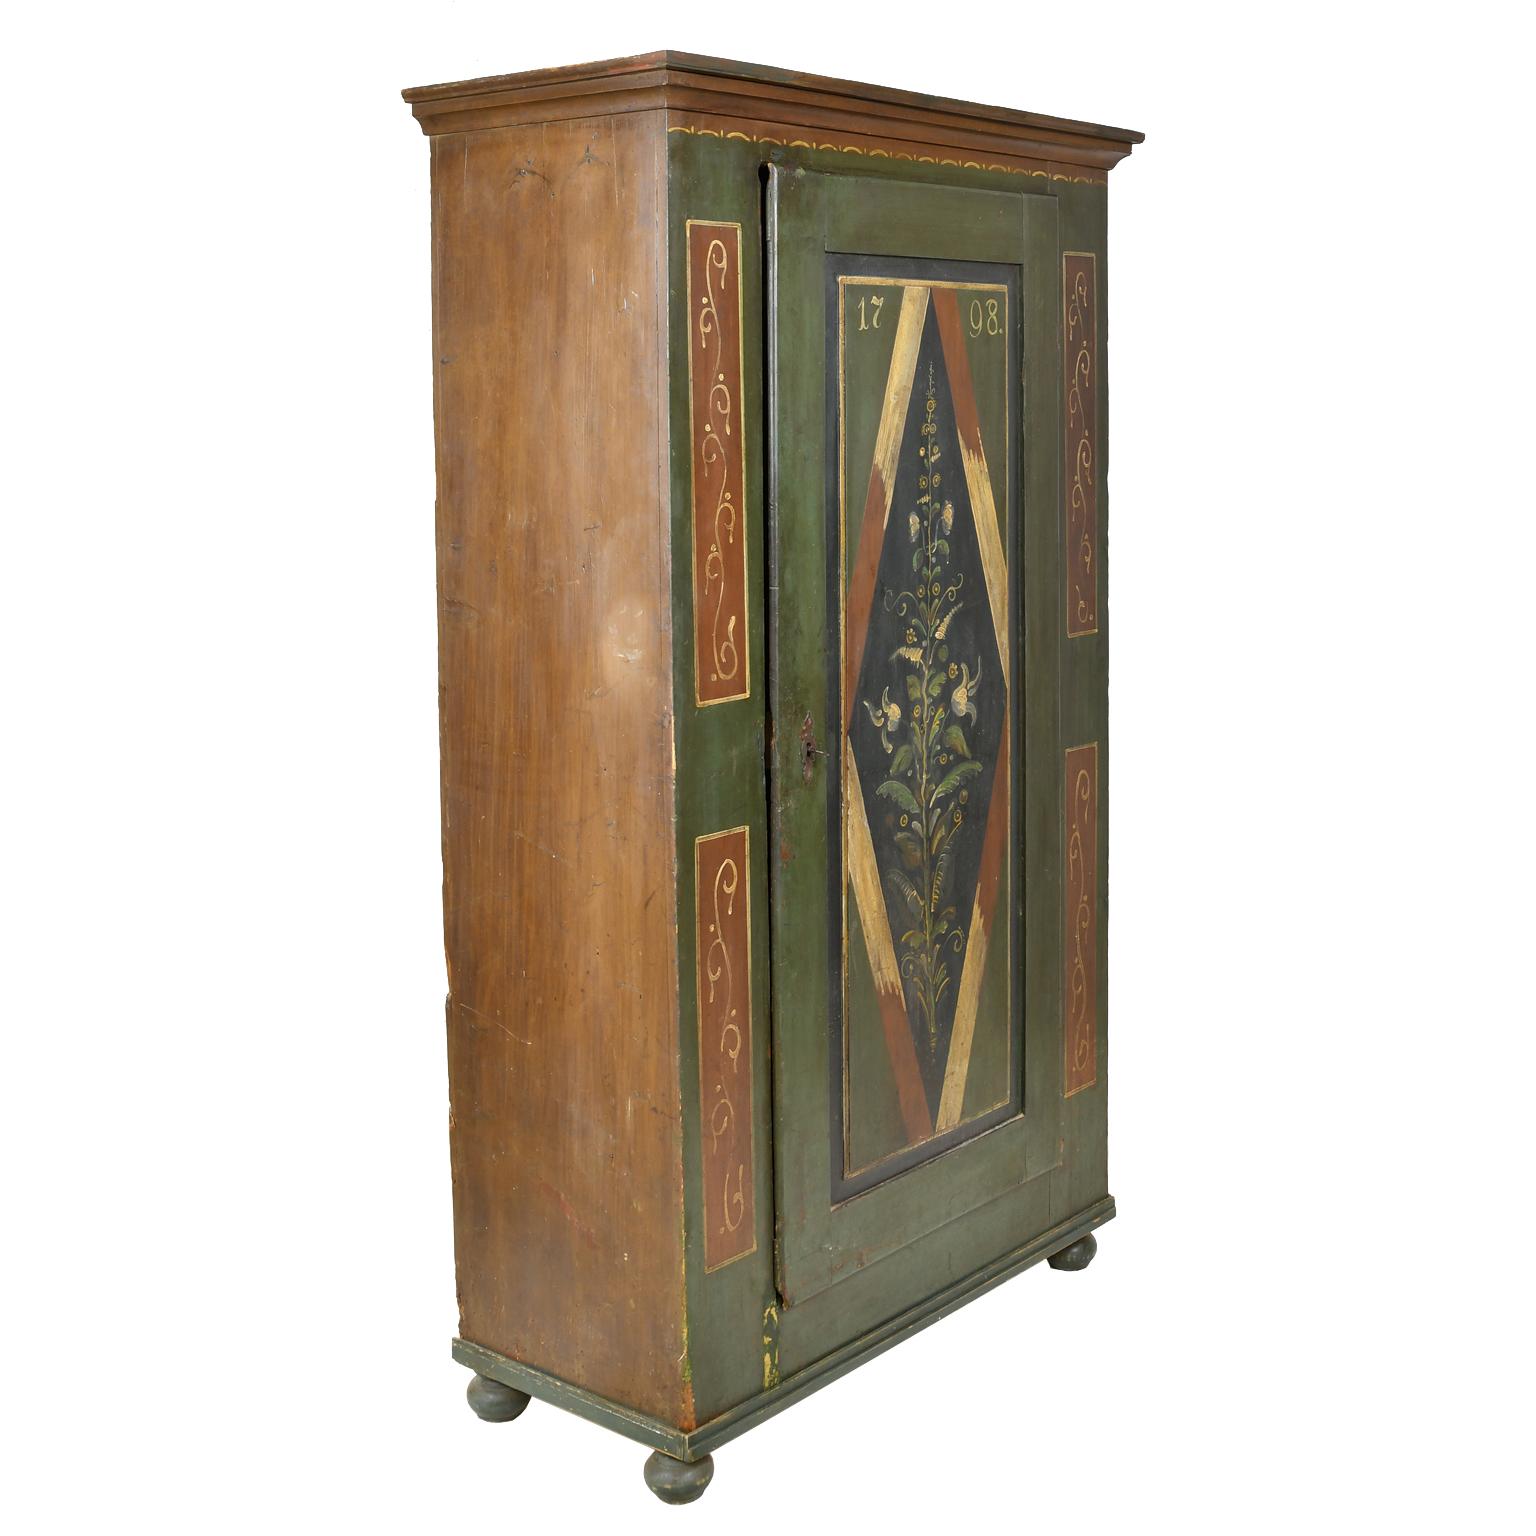 European Antique Dowry/Wedding Armoire with Green and Maroon Paint and Floral Design